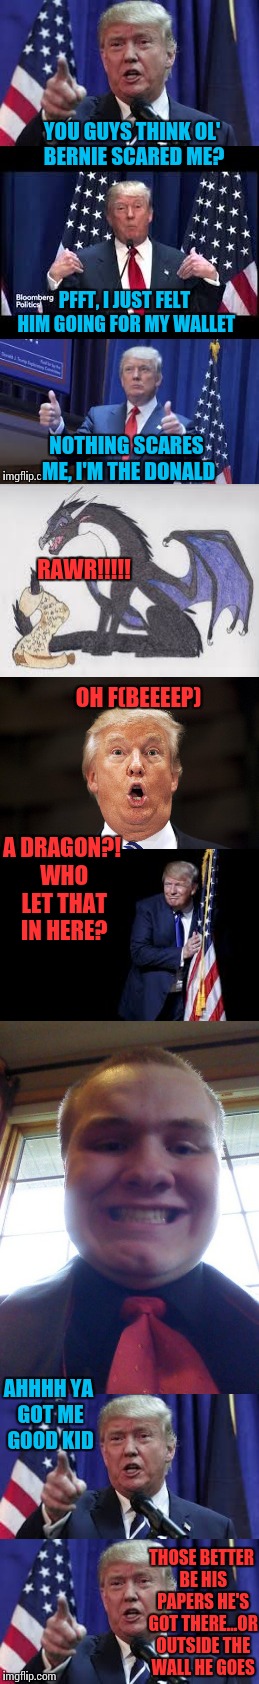 The donald apparently does not scare easily....but i know one thing that would scare him... | YOU GUYS THINK OL' BERNIE SCARED ME? PFFT, I JUST FELT HIM GOING FOR MY WALLET; NOTHING SCARES ME, I'M THE DONALD; RAWR!!!!! OH F(BEEEEP); A DRAGON?! WHO LET THAT IN HERE? AHHHH YA GOT ME GOOD KID; THOSE BETTER BE HIS PAPERS HE'S GOT THERE...OR OUTSIDE THE WALL HE GOES | image tagged in let's make a deal trump,starflight the nightwing,funny meme,donald trump | made w/ Imgflip meme maker